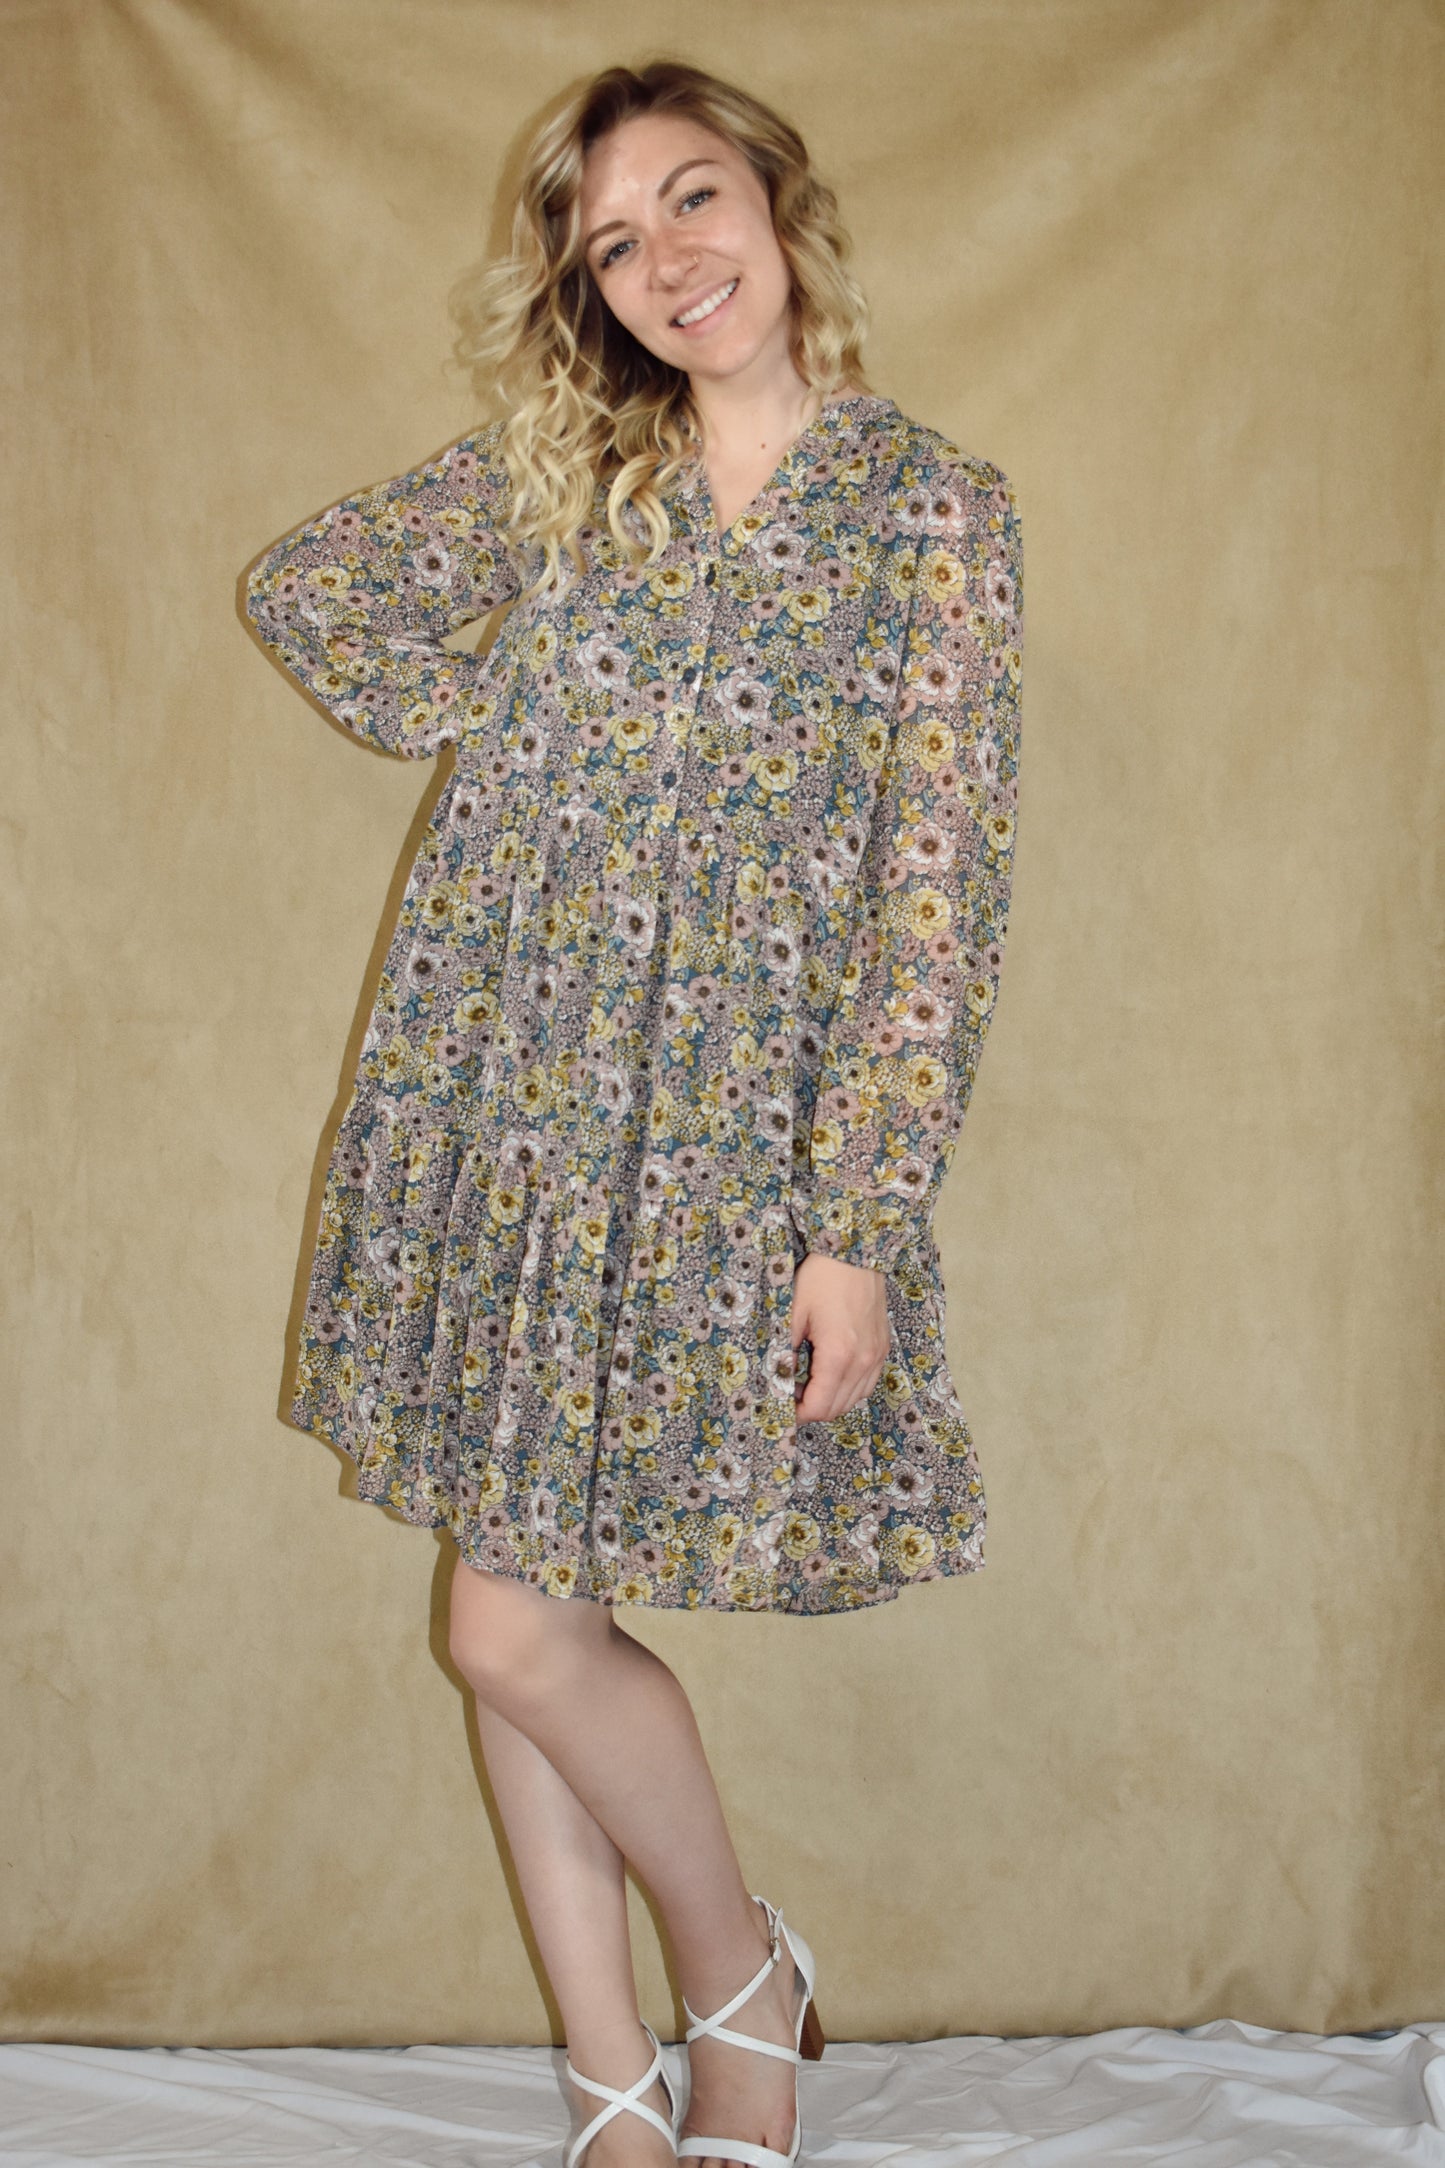 long sleeve mini dress loose fitted, vintage floral pattern, round neckline, slit front and placket with button front closure. ruffle tier skirt